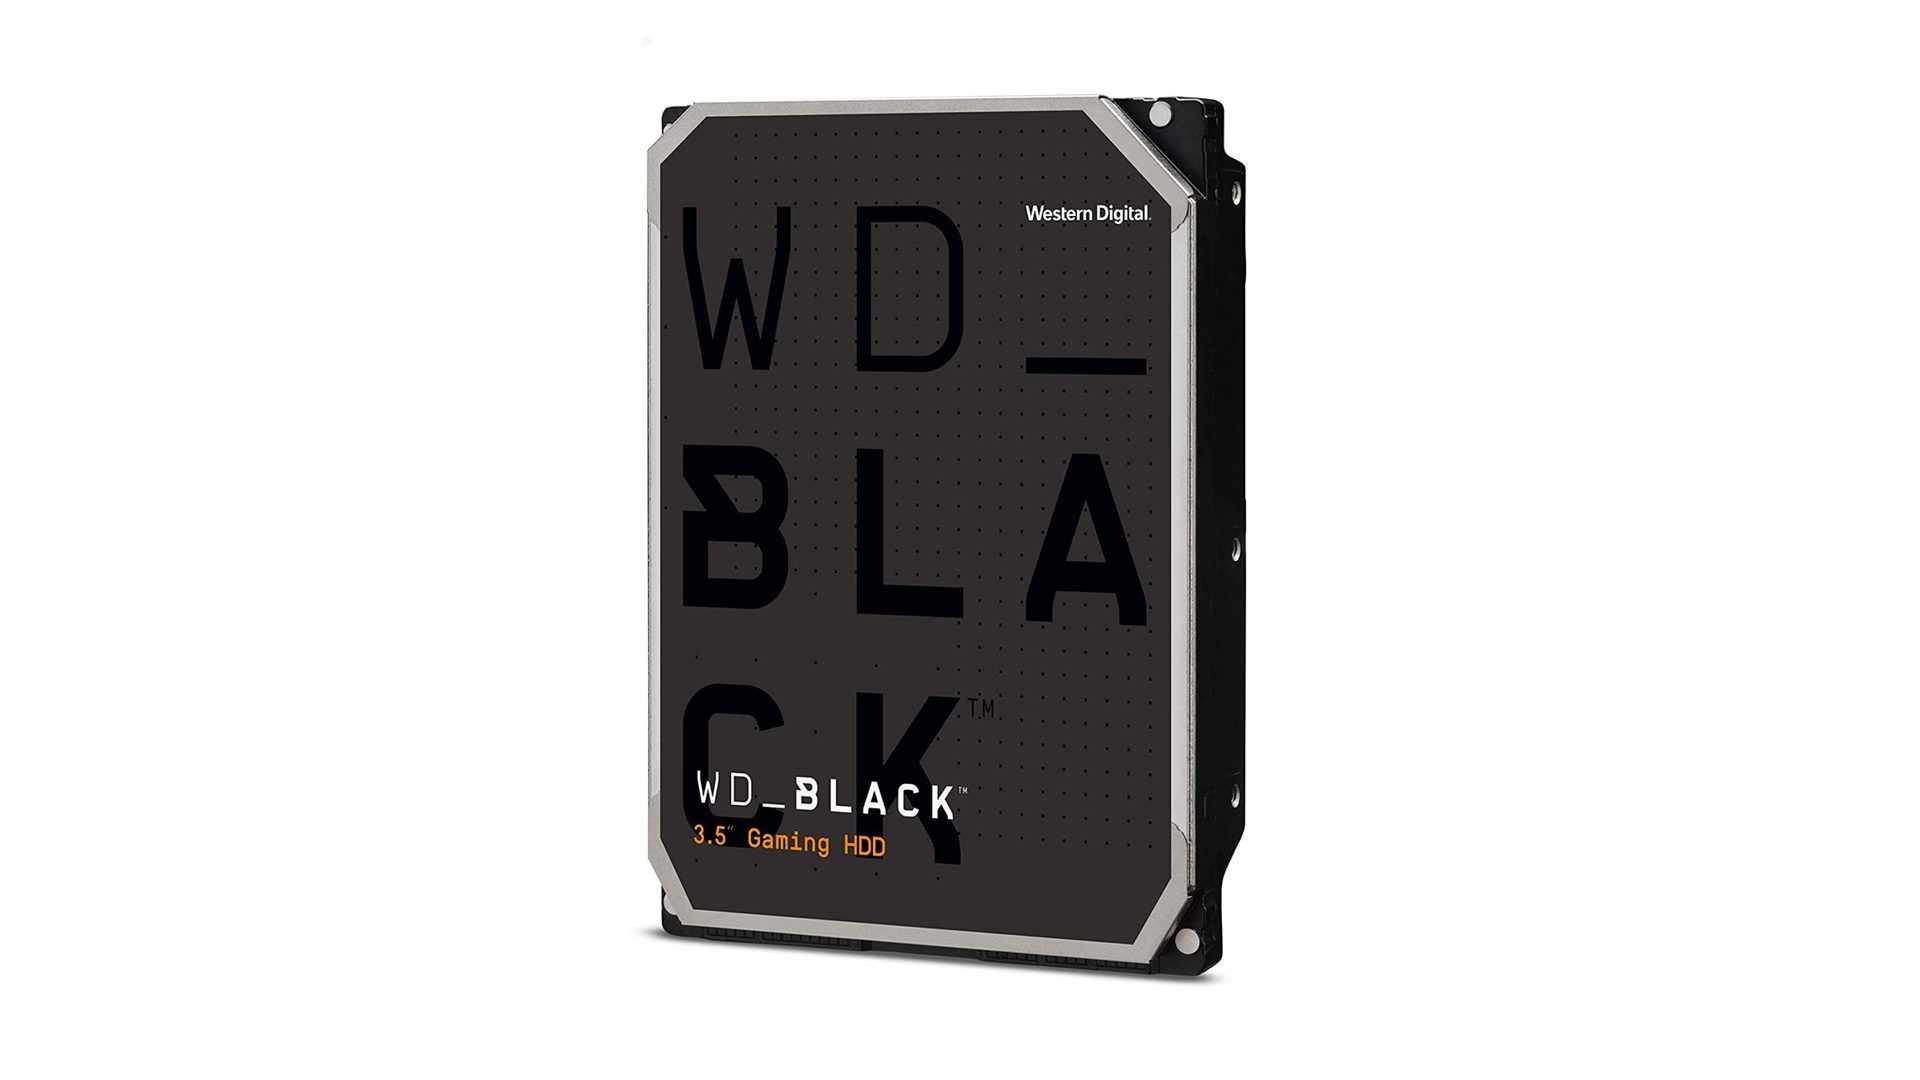 WD Black Performance hard drive on a white background